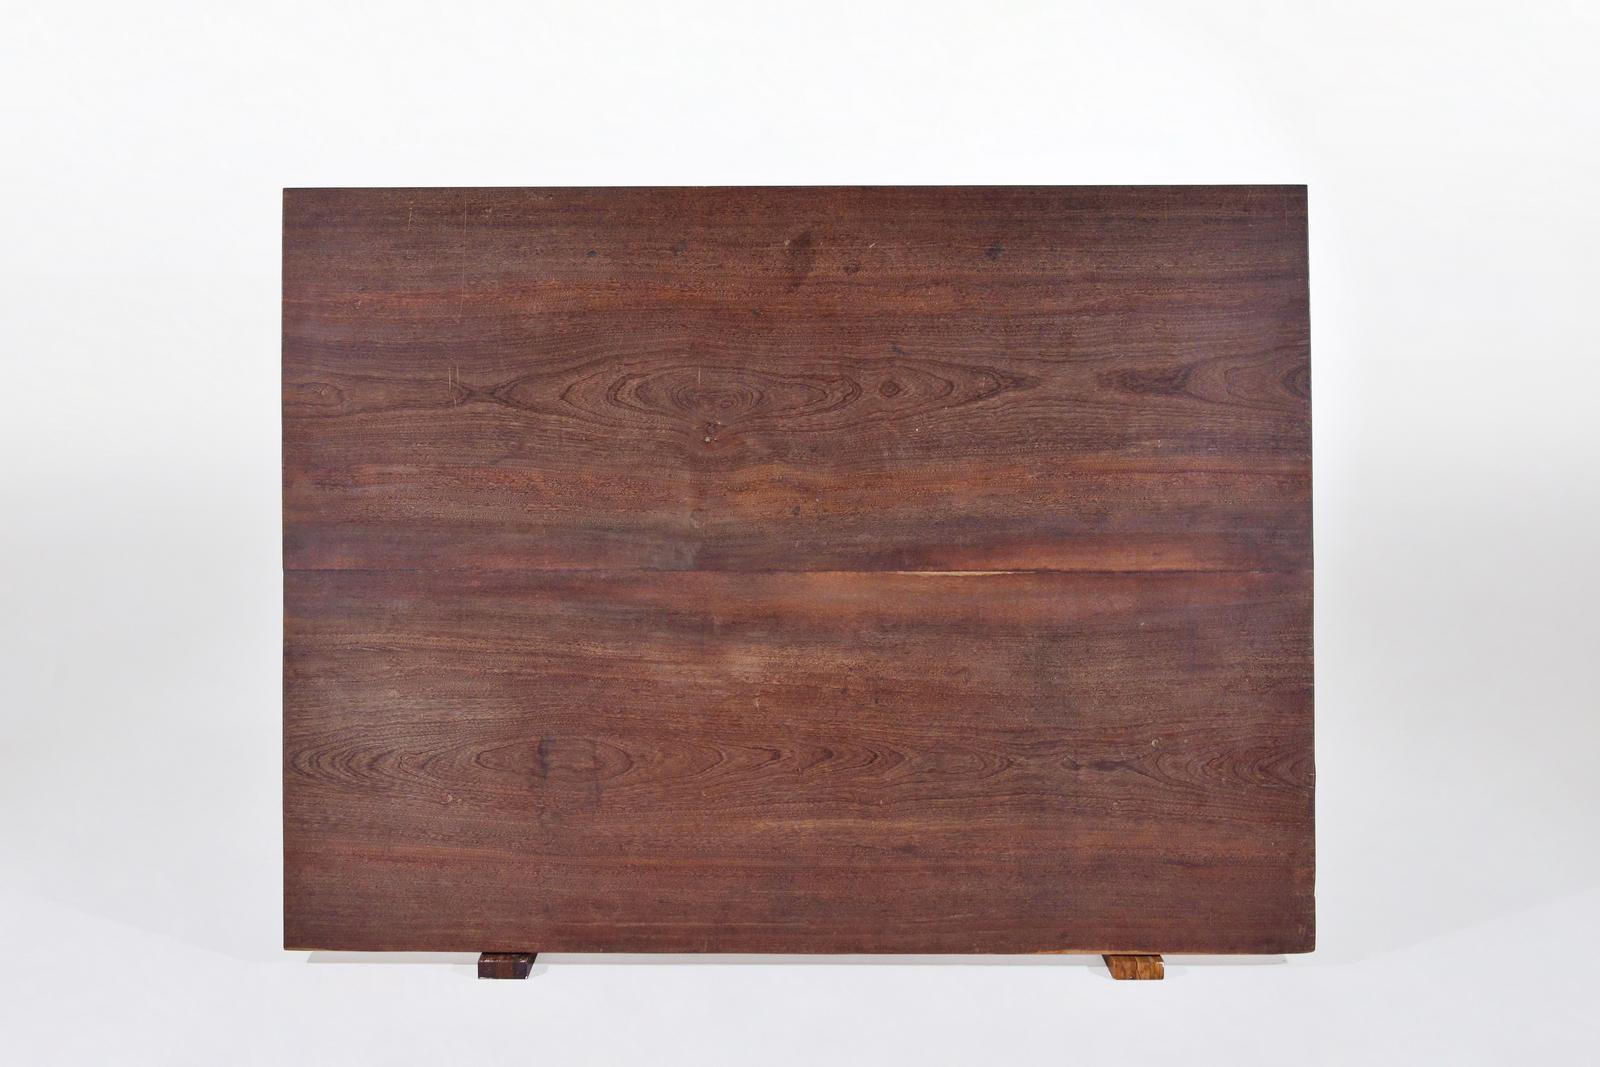 Bespoke Coffee Table, Antique Hardwood Slab and Wood Bases, by P. Tendercool For Sale 2